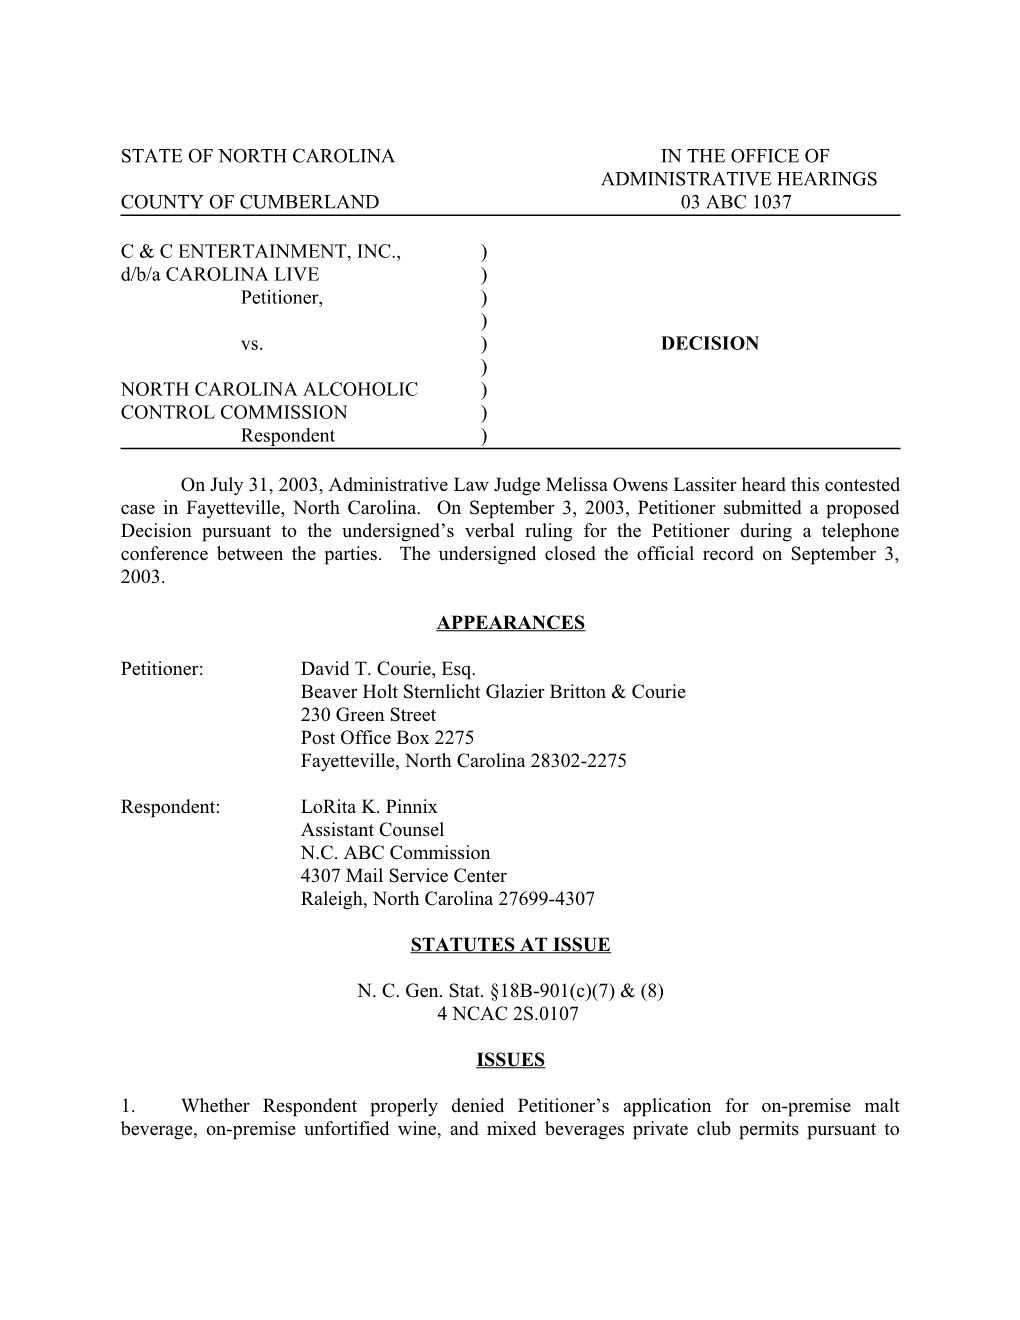 Contested Case Hearing Decision (00038803;1)